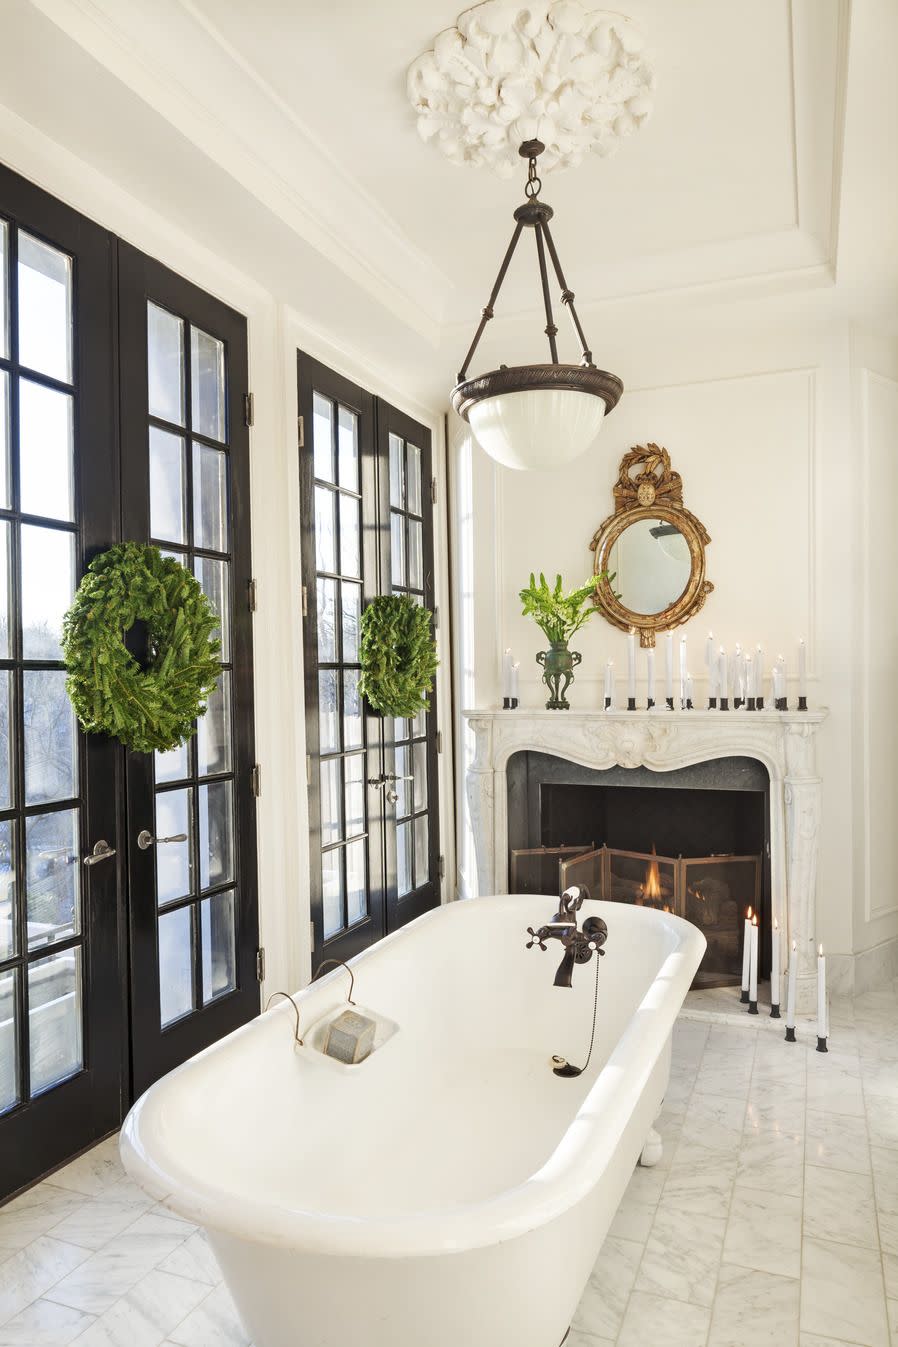 in designer darryl carters dc home the master bath has an antique claw foot tub and gilt mirror